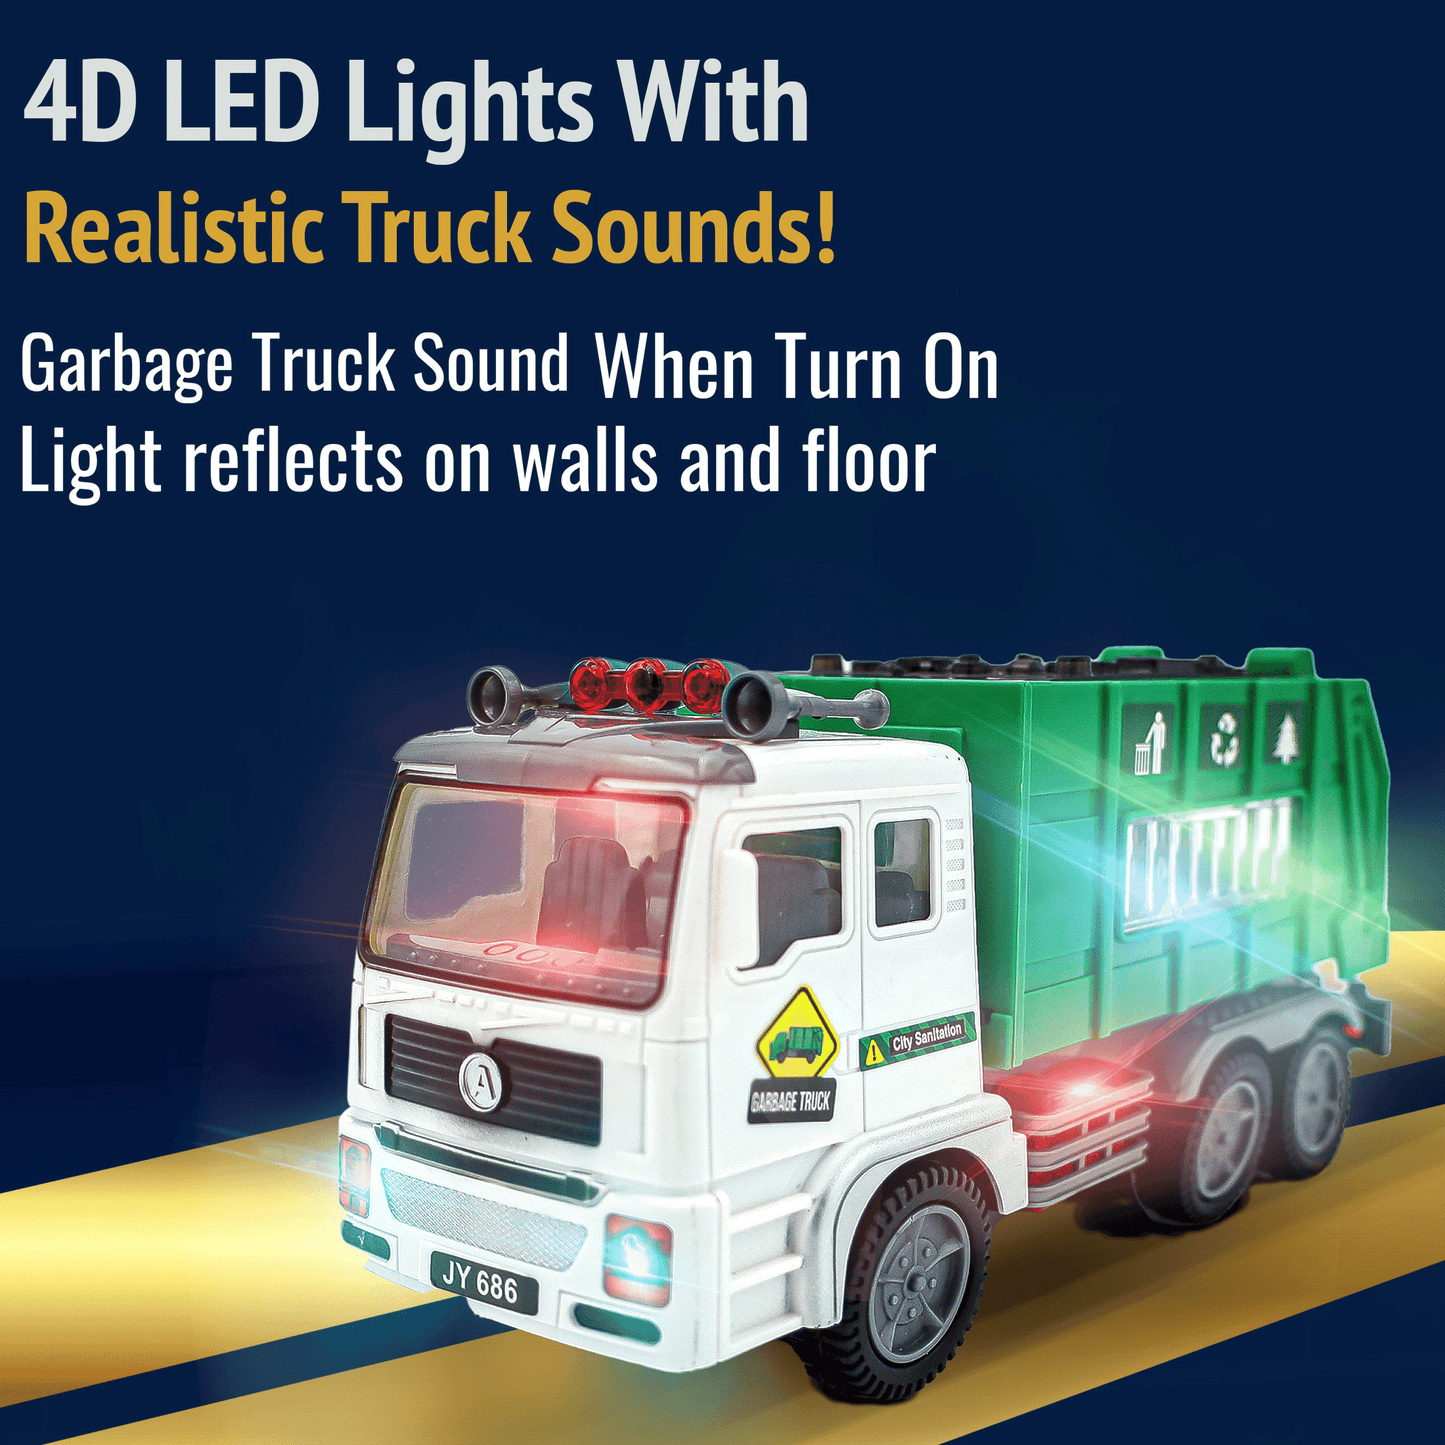 Garbage Truck Toy 4D Lights & Sounds - Battery-Powered Bump & Go Action, Kids Sanitation Vehicle with Realistic Stickers